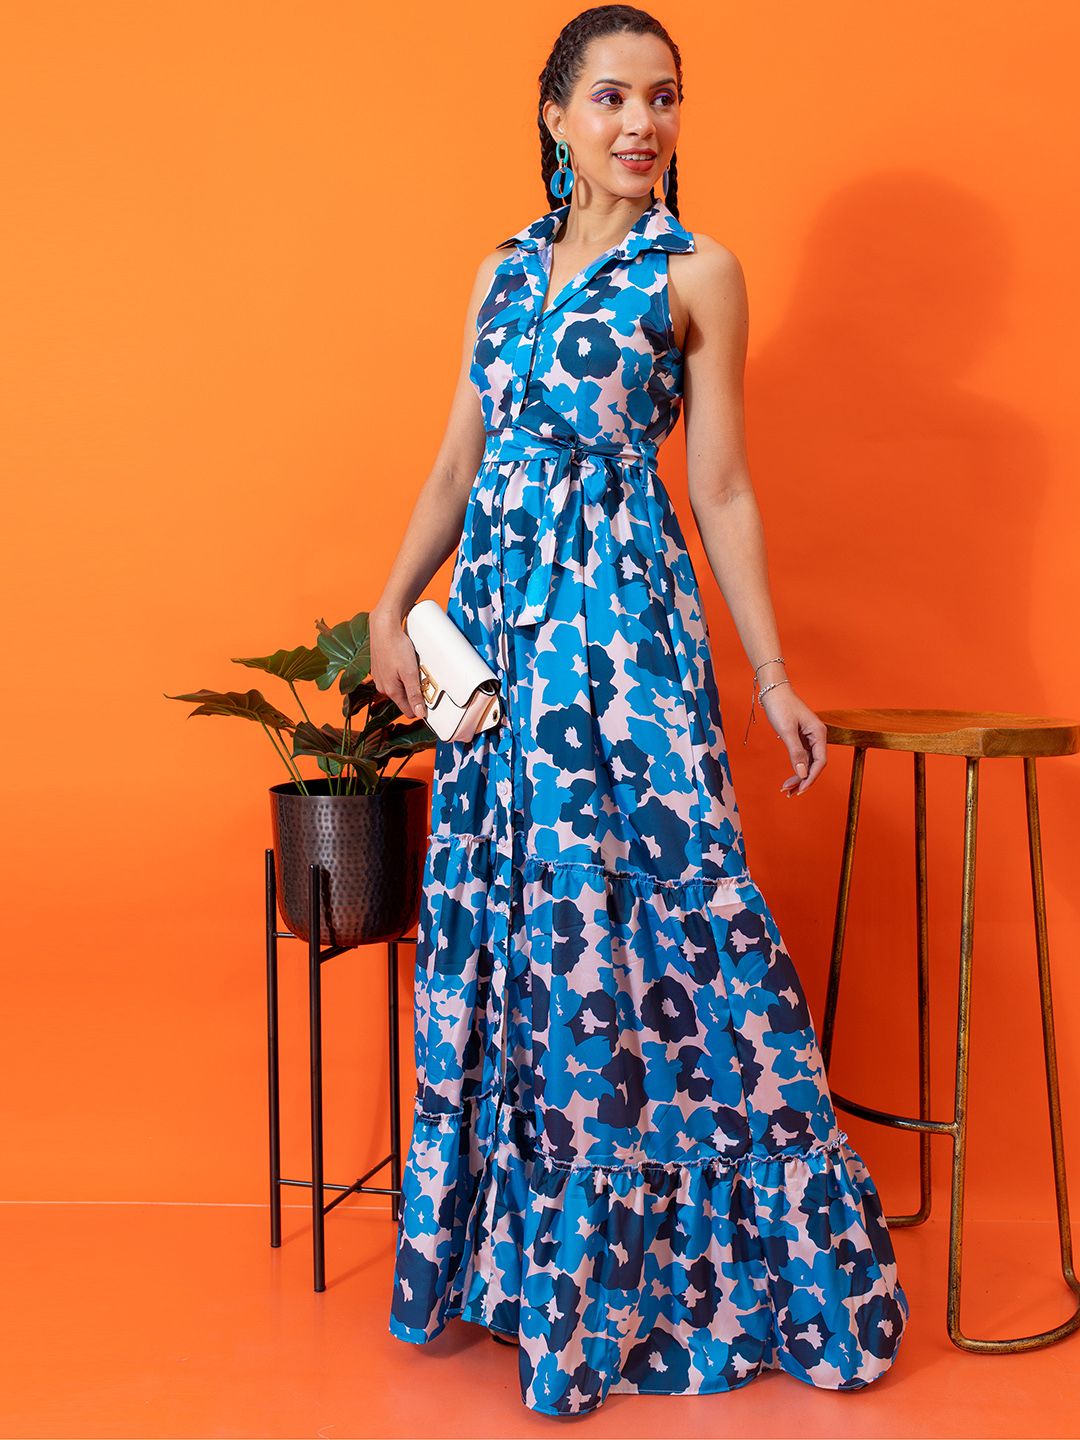 Stylecast X Hersheinbox Shirt Collar Floral Printed Tiered Belted Maxi Dress Price in India